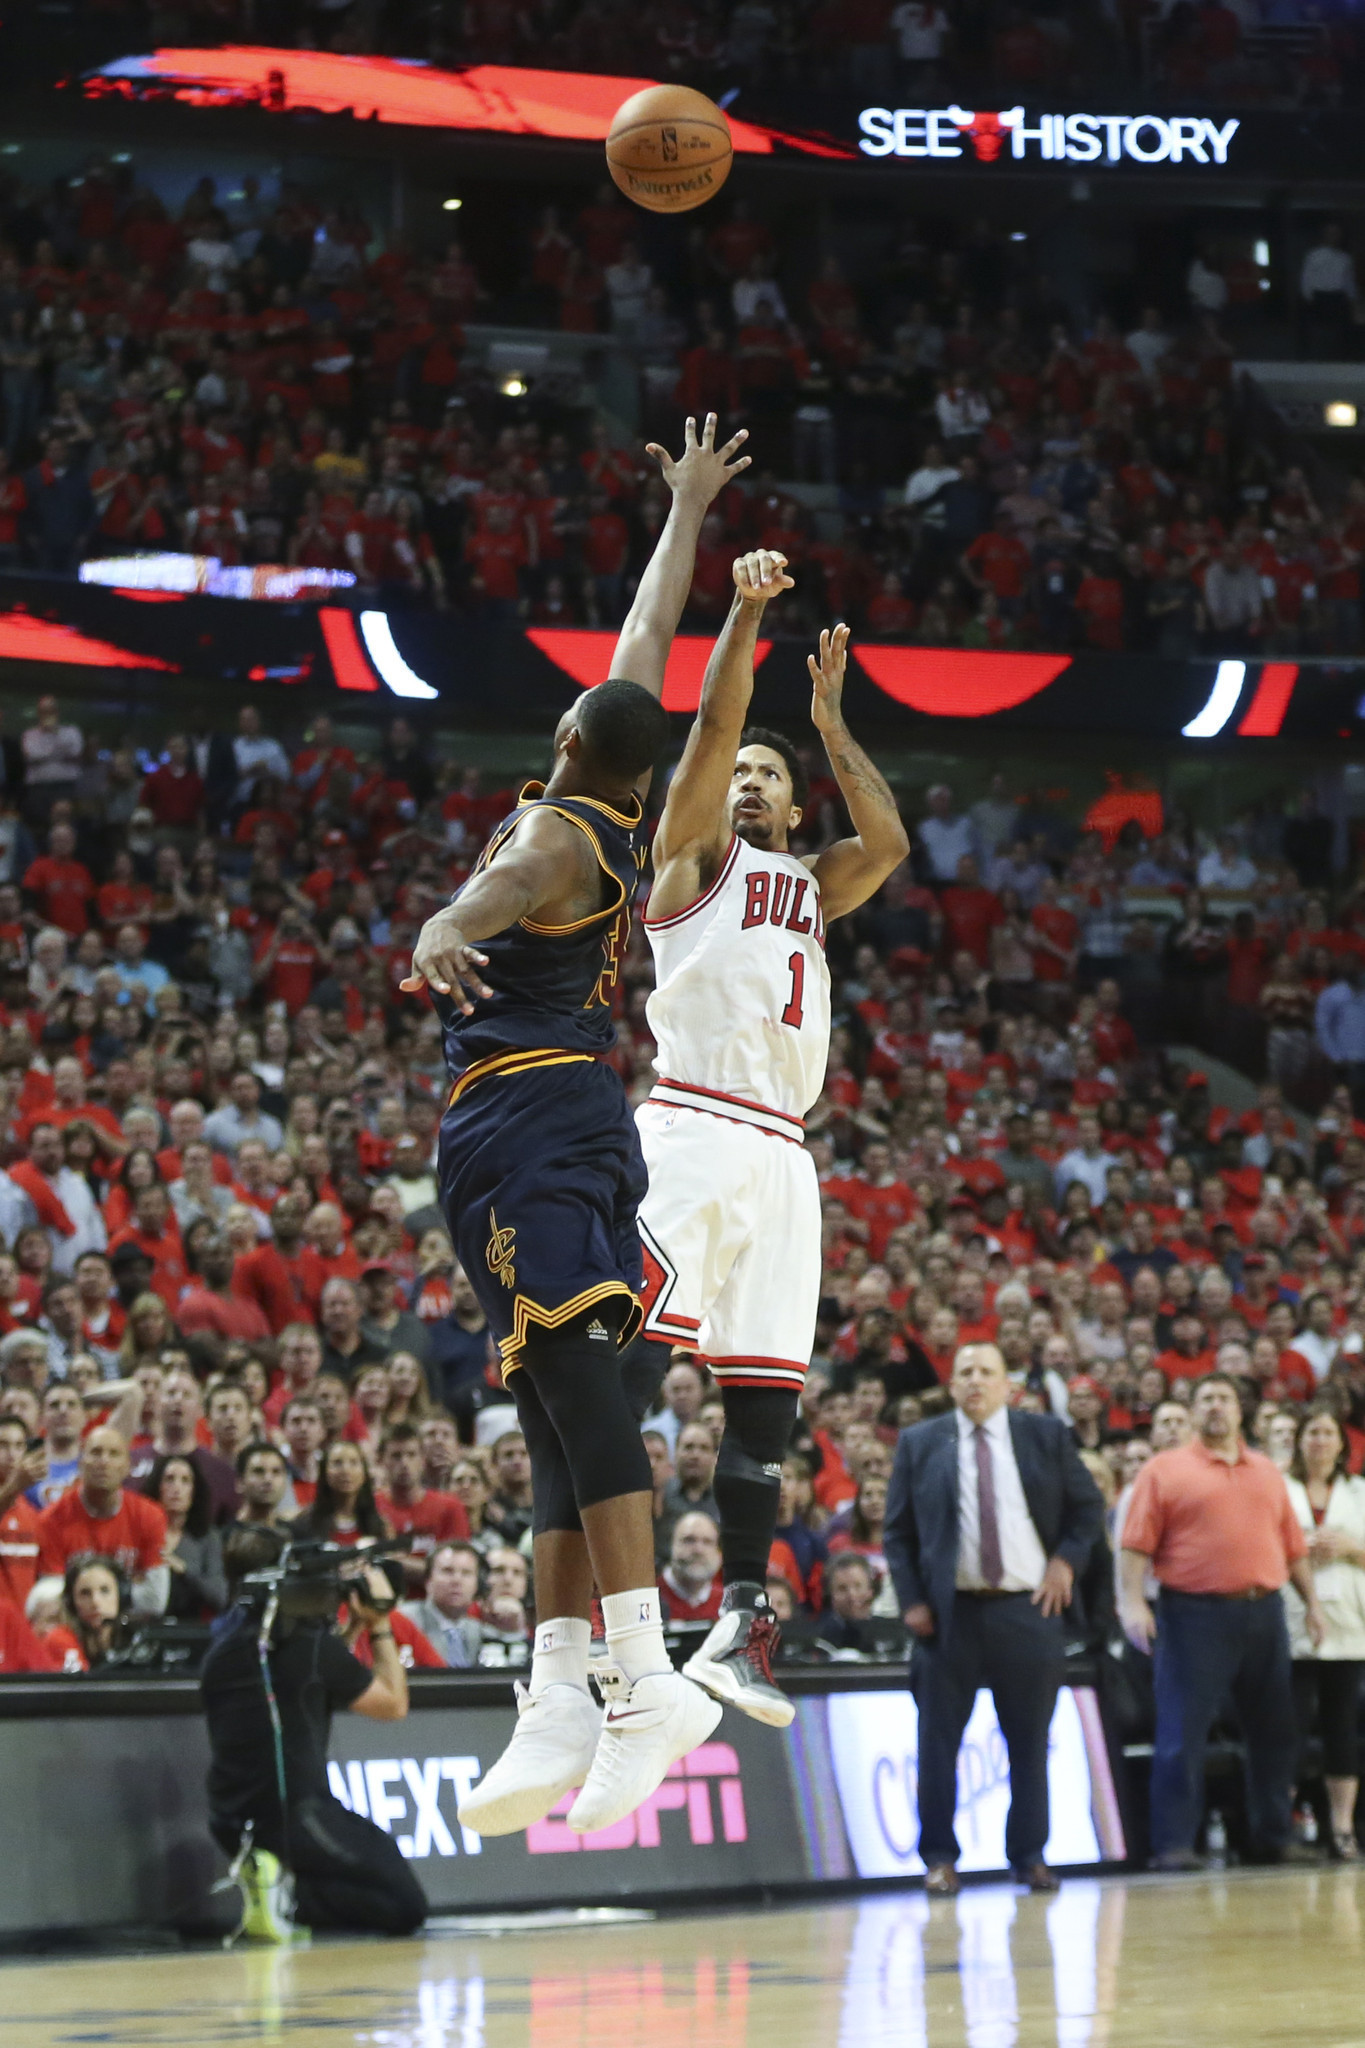 Derrick Rose turns back clock with his buzzer-beating game-winner